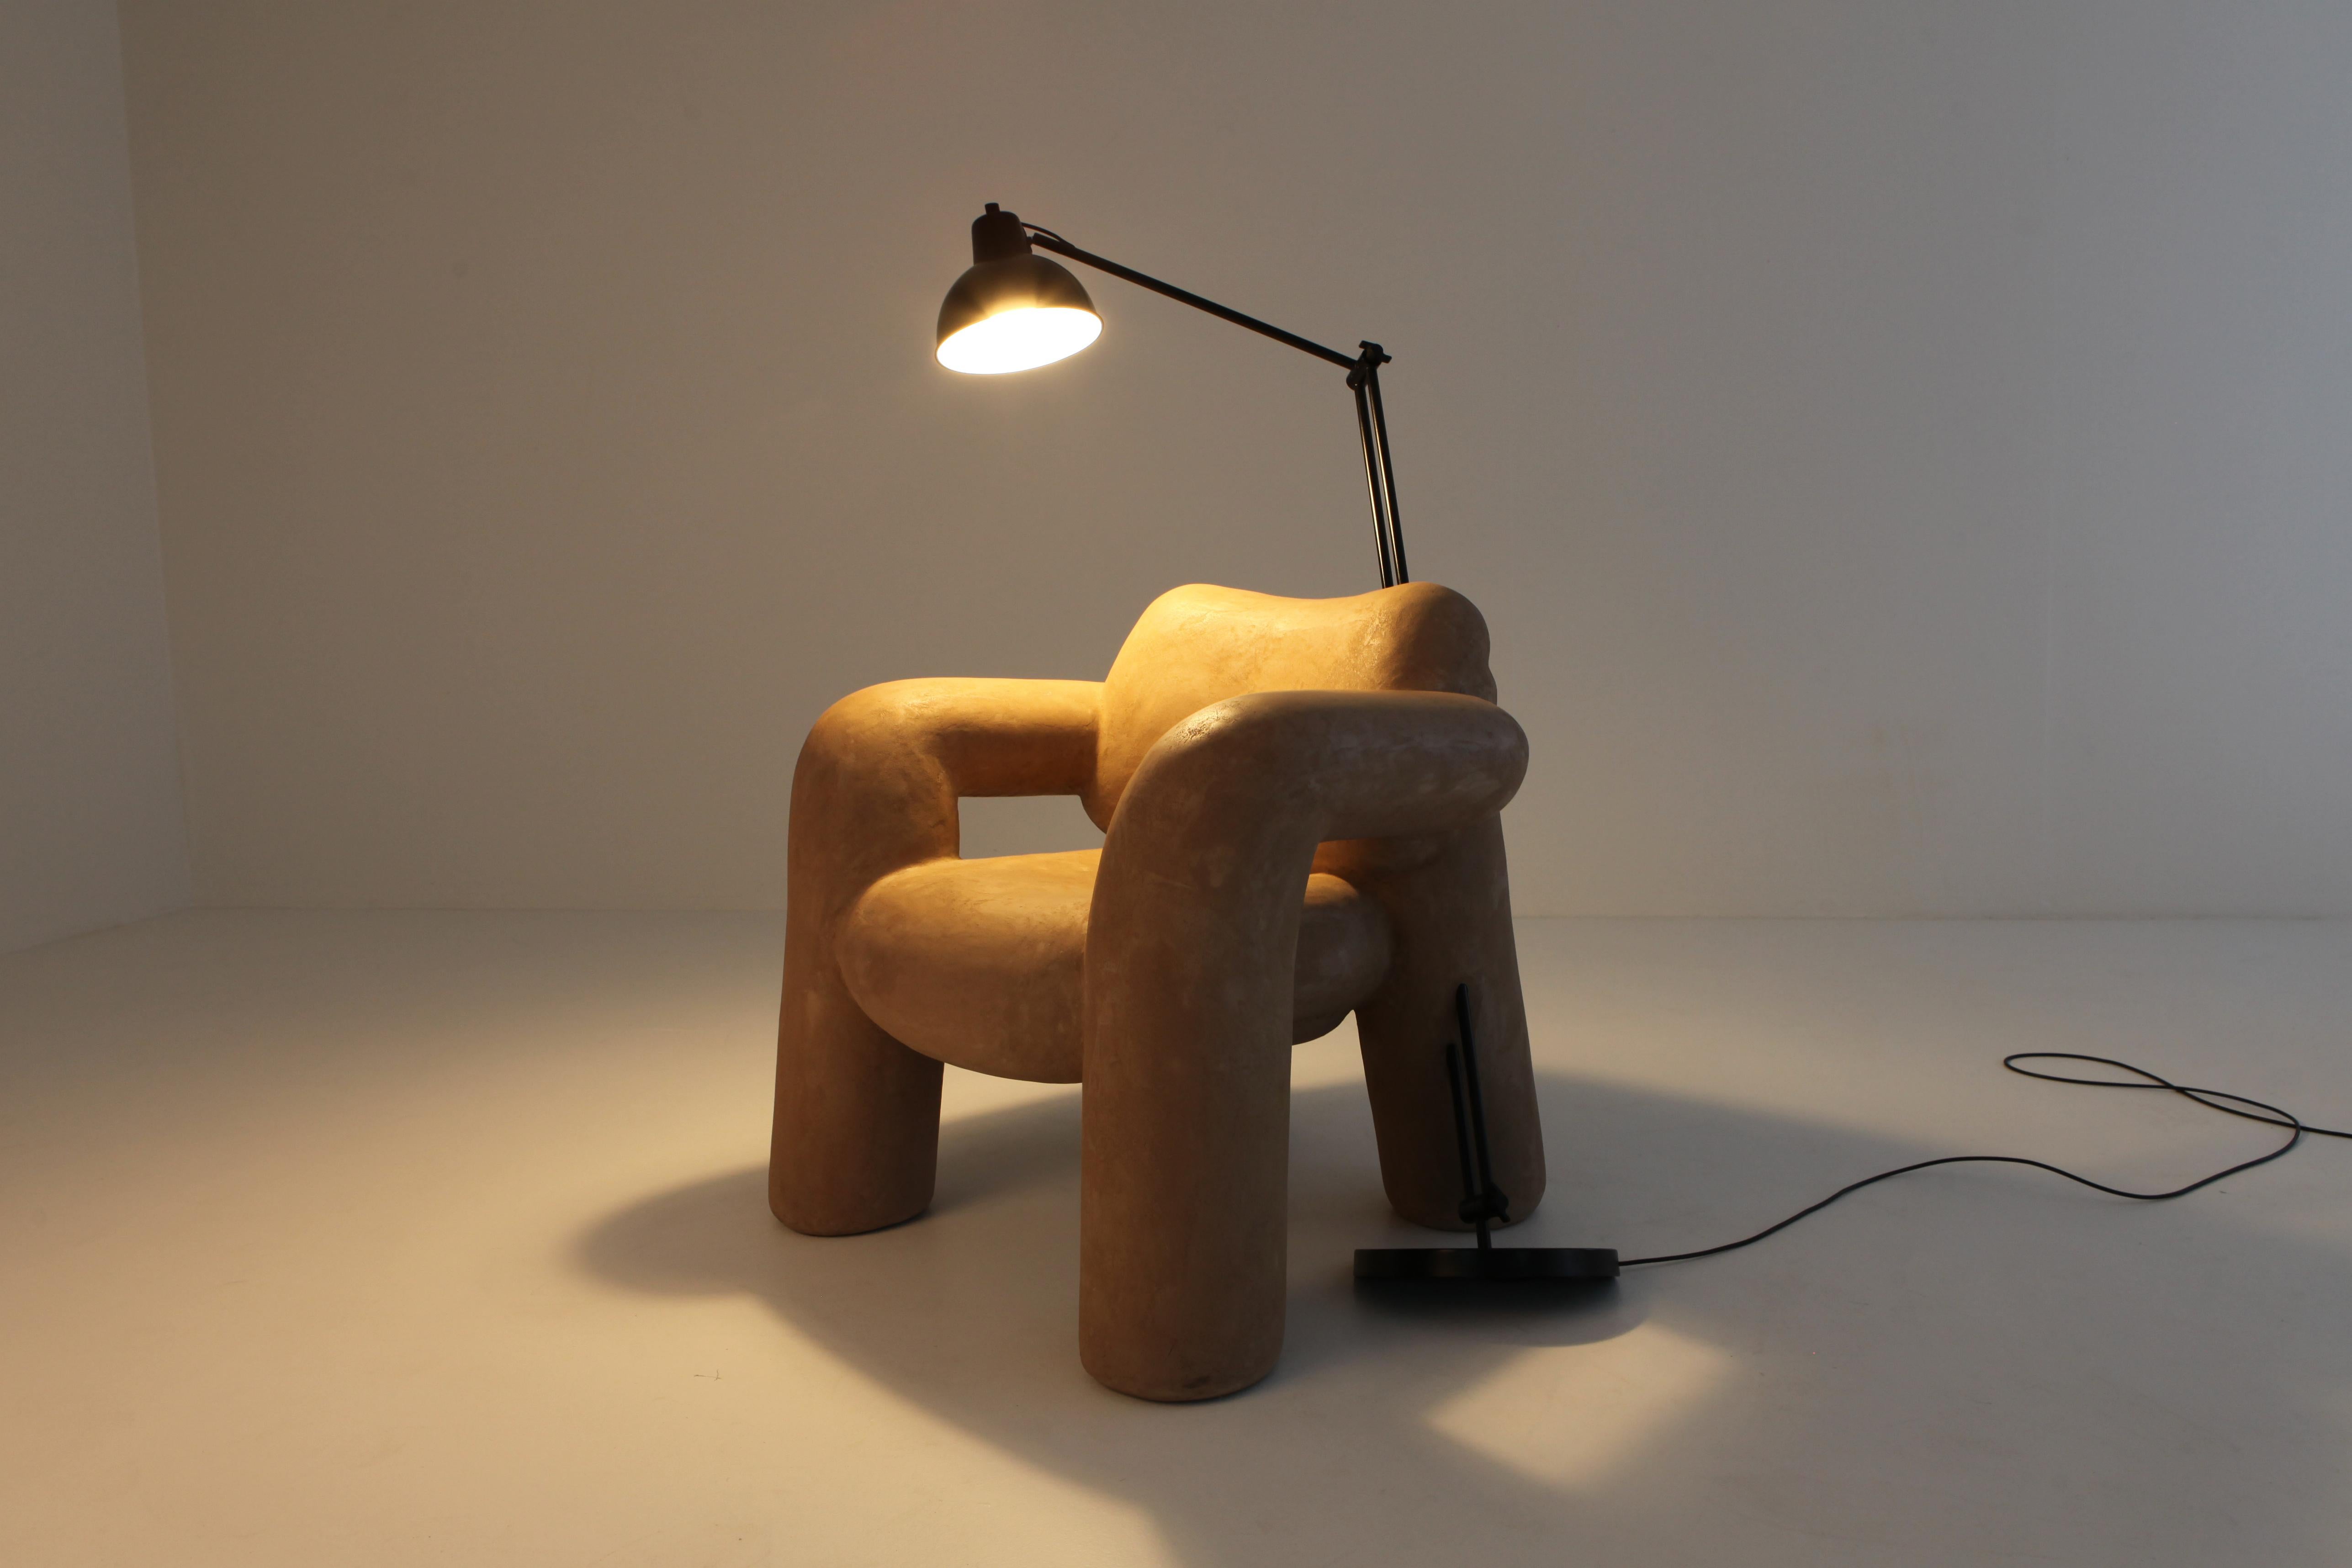 Plastic 'Blown-Up with Lamp' by Schimmel & Schweikle in Vegan Leather Coating